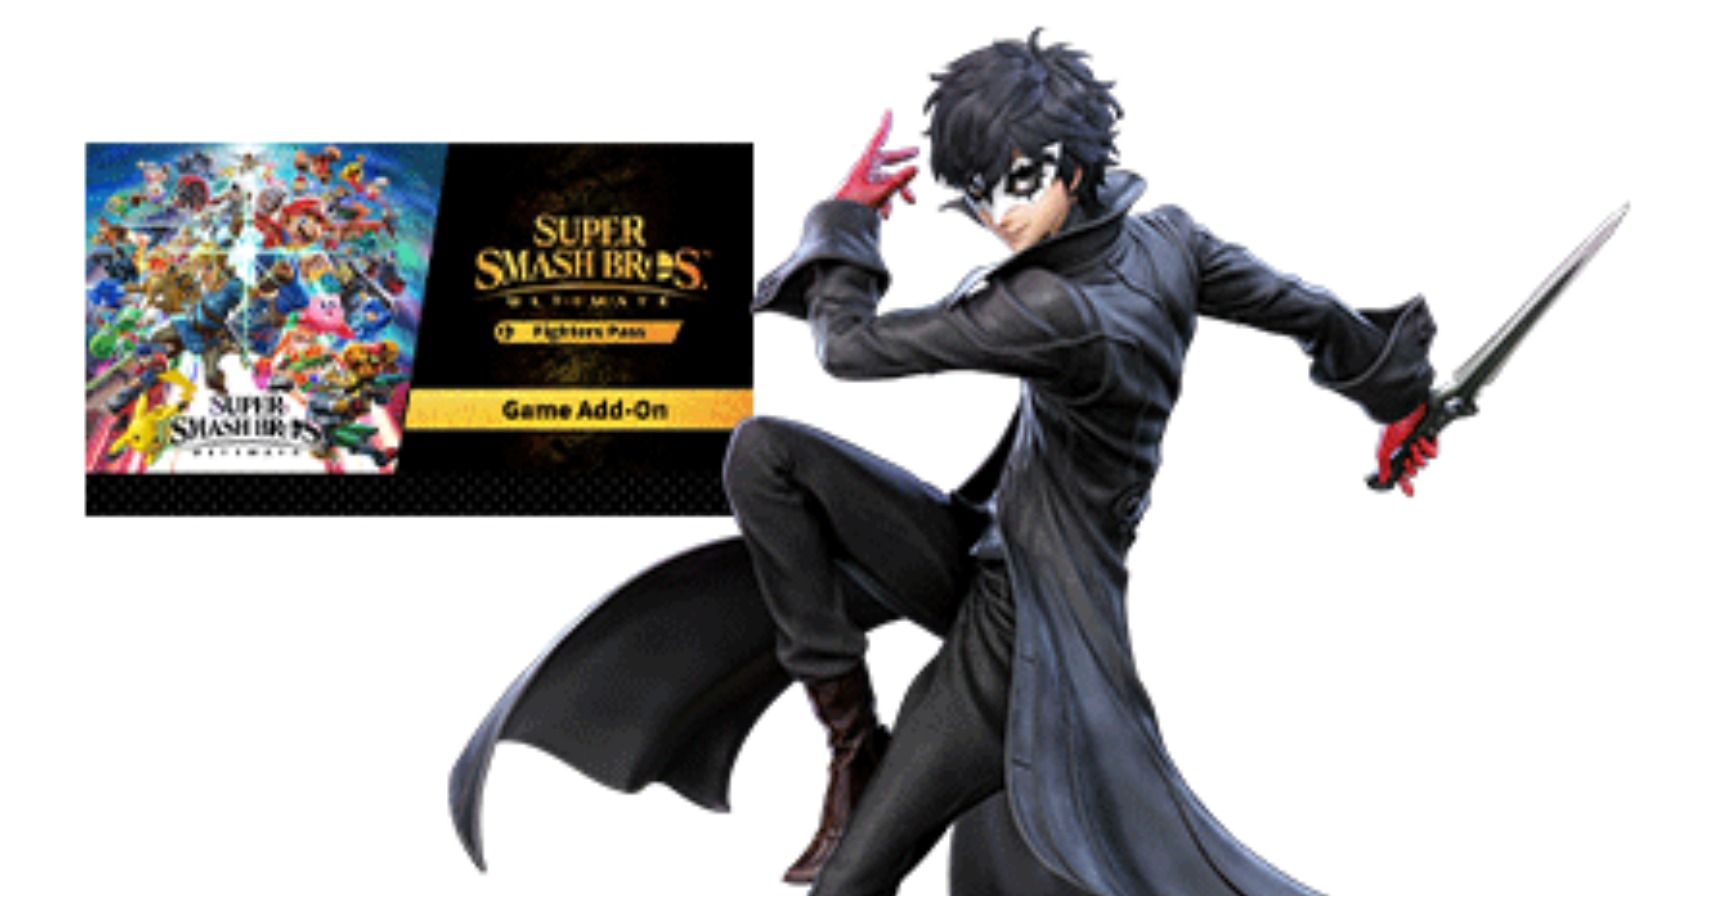 A Glimpse Of Persona 5s Joker For Ultimate Has Been Leaked By Best Buy